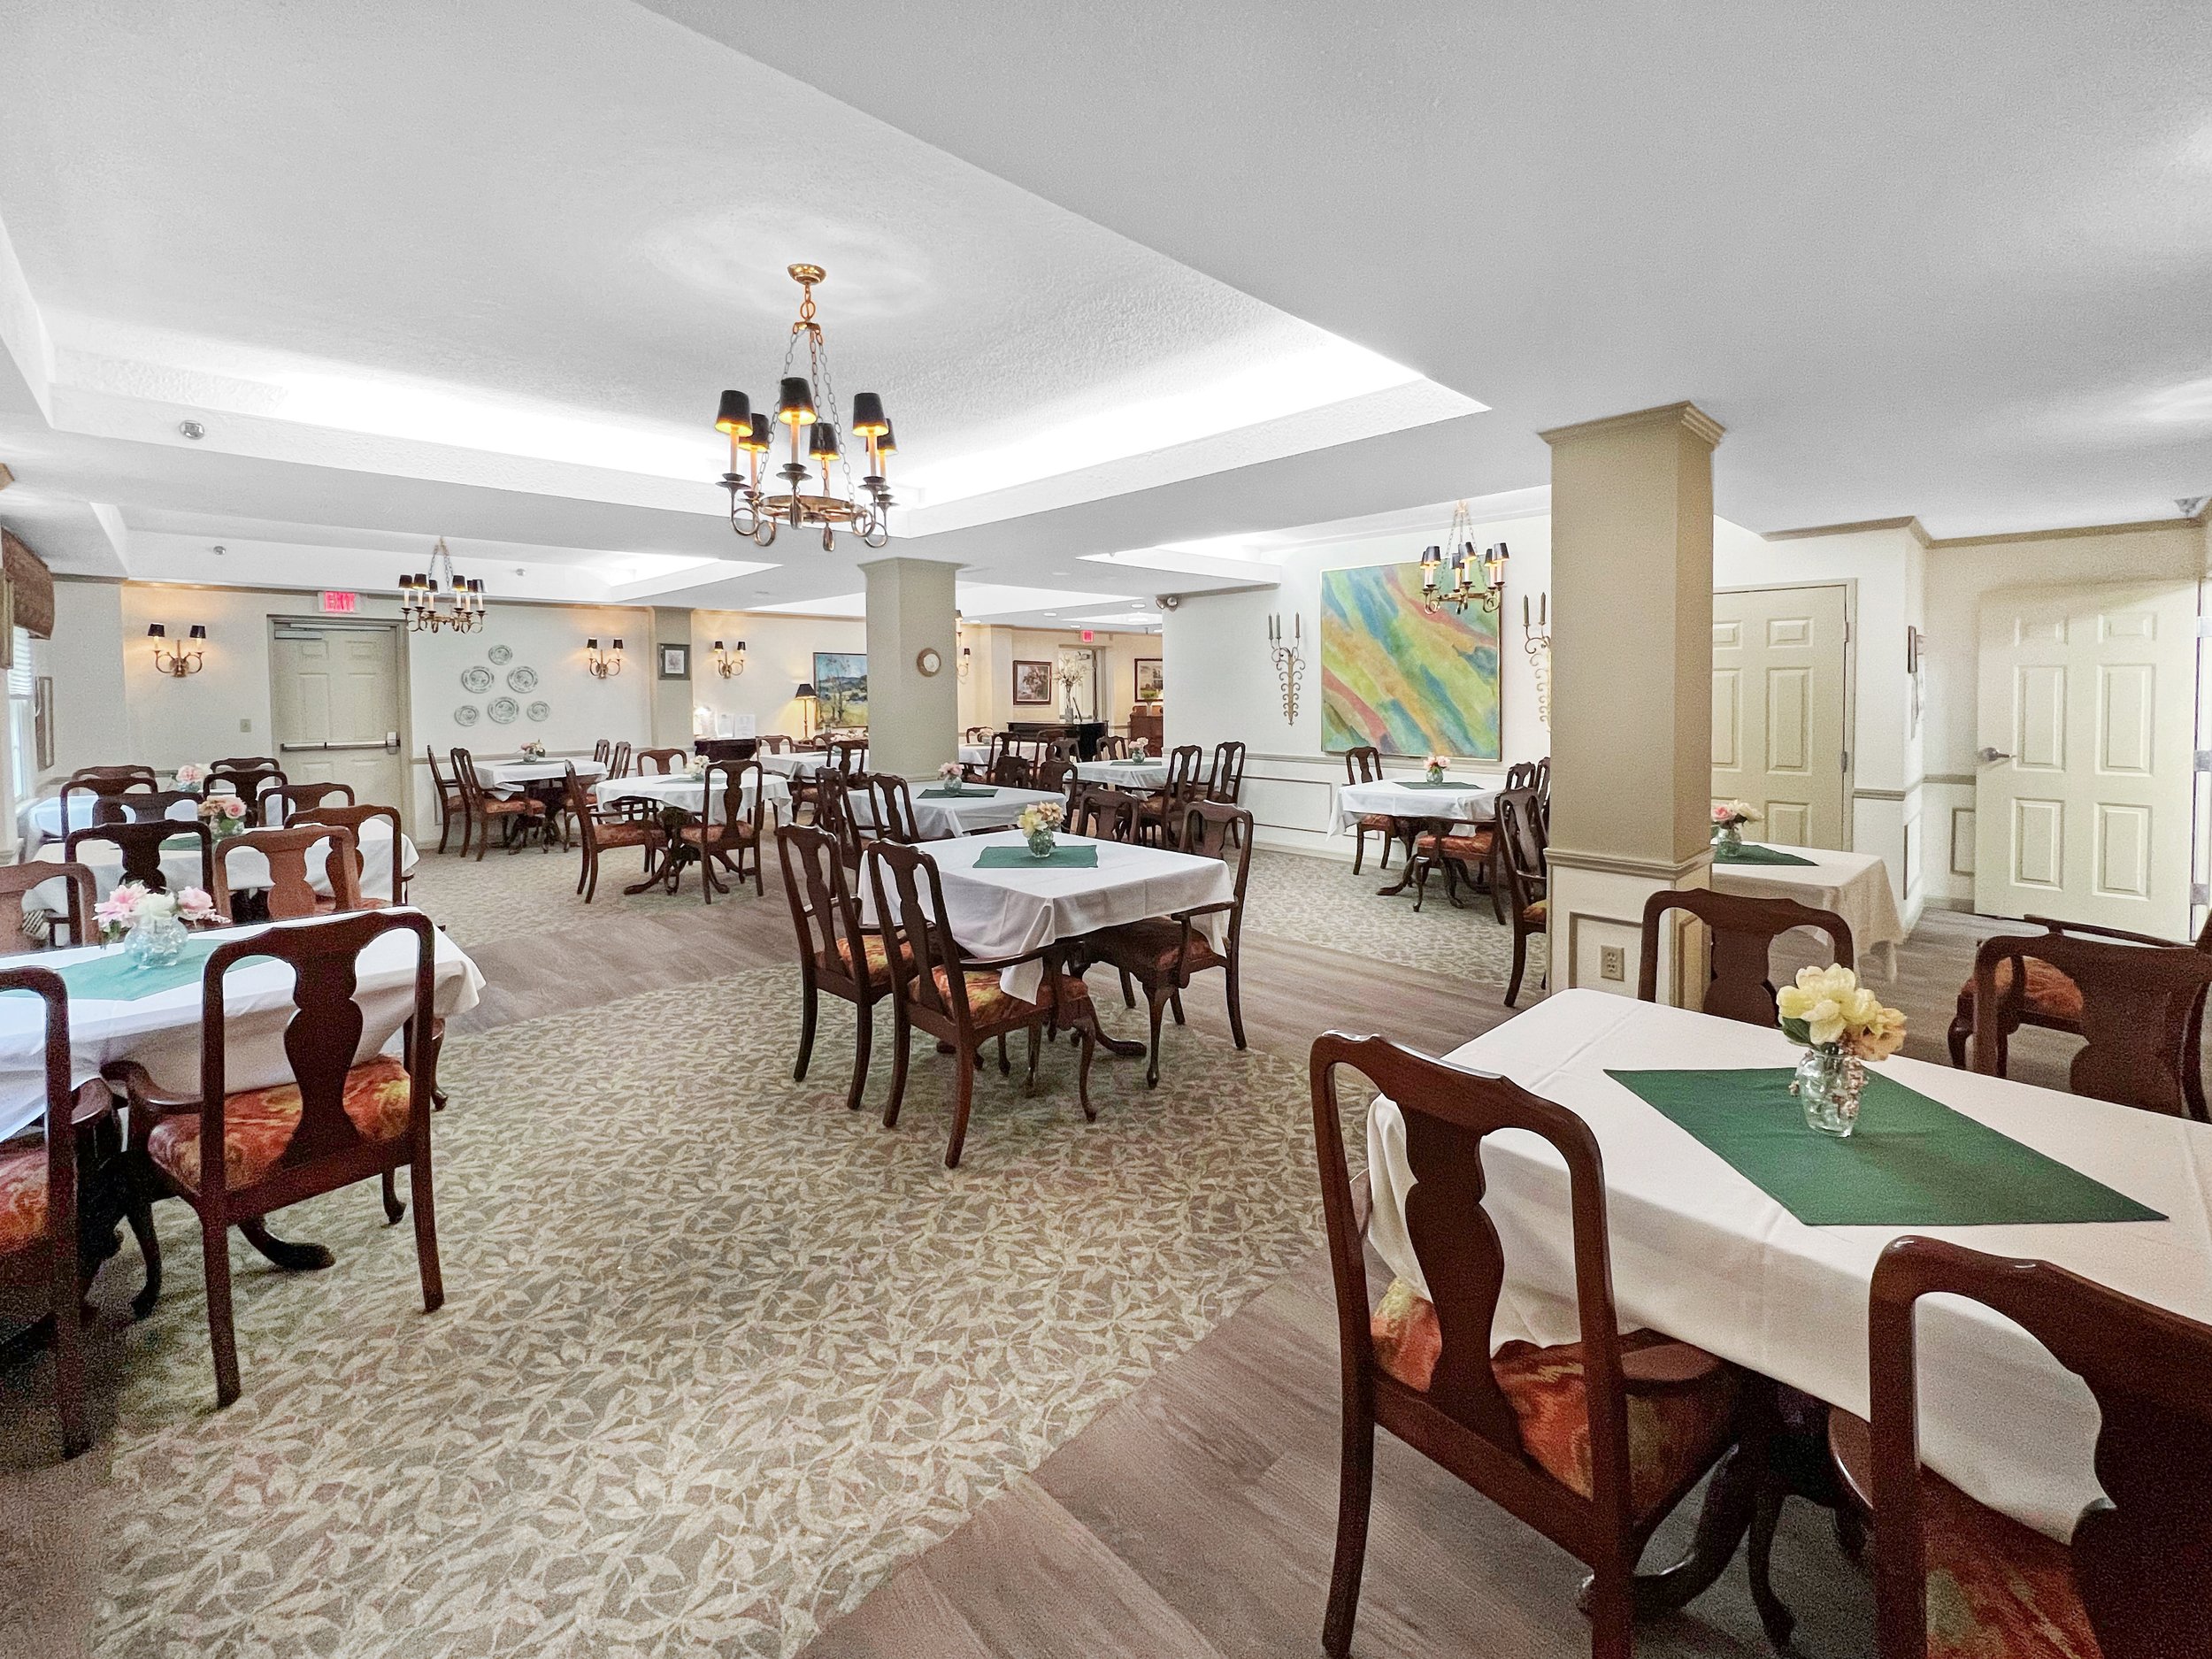  Luxury Senior Apartments located in the Village of New Hartford, NY. Serving the Greater Utica, NY area with quality senior living since 1882! 